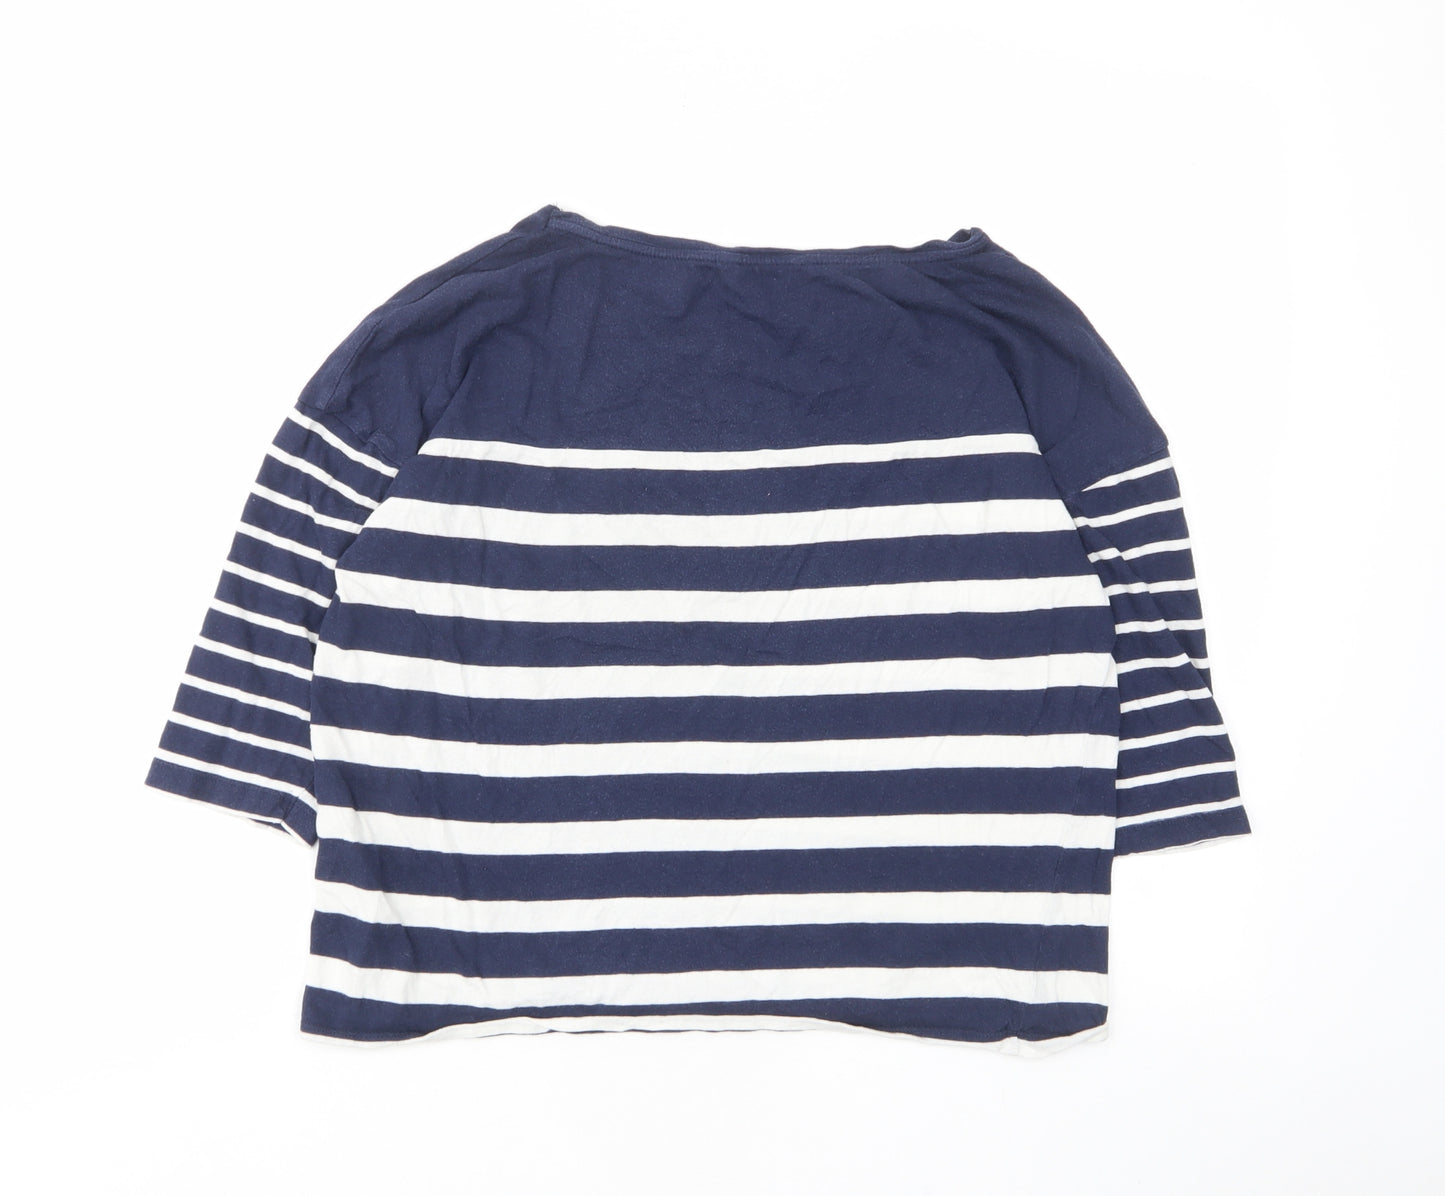 Pull&Bear Womens Blue Striped Cotton Basic T-Shirt Size S Boat Neck